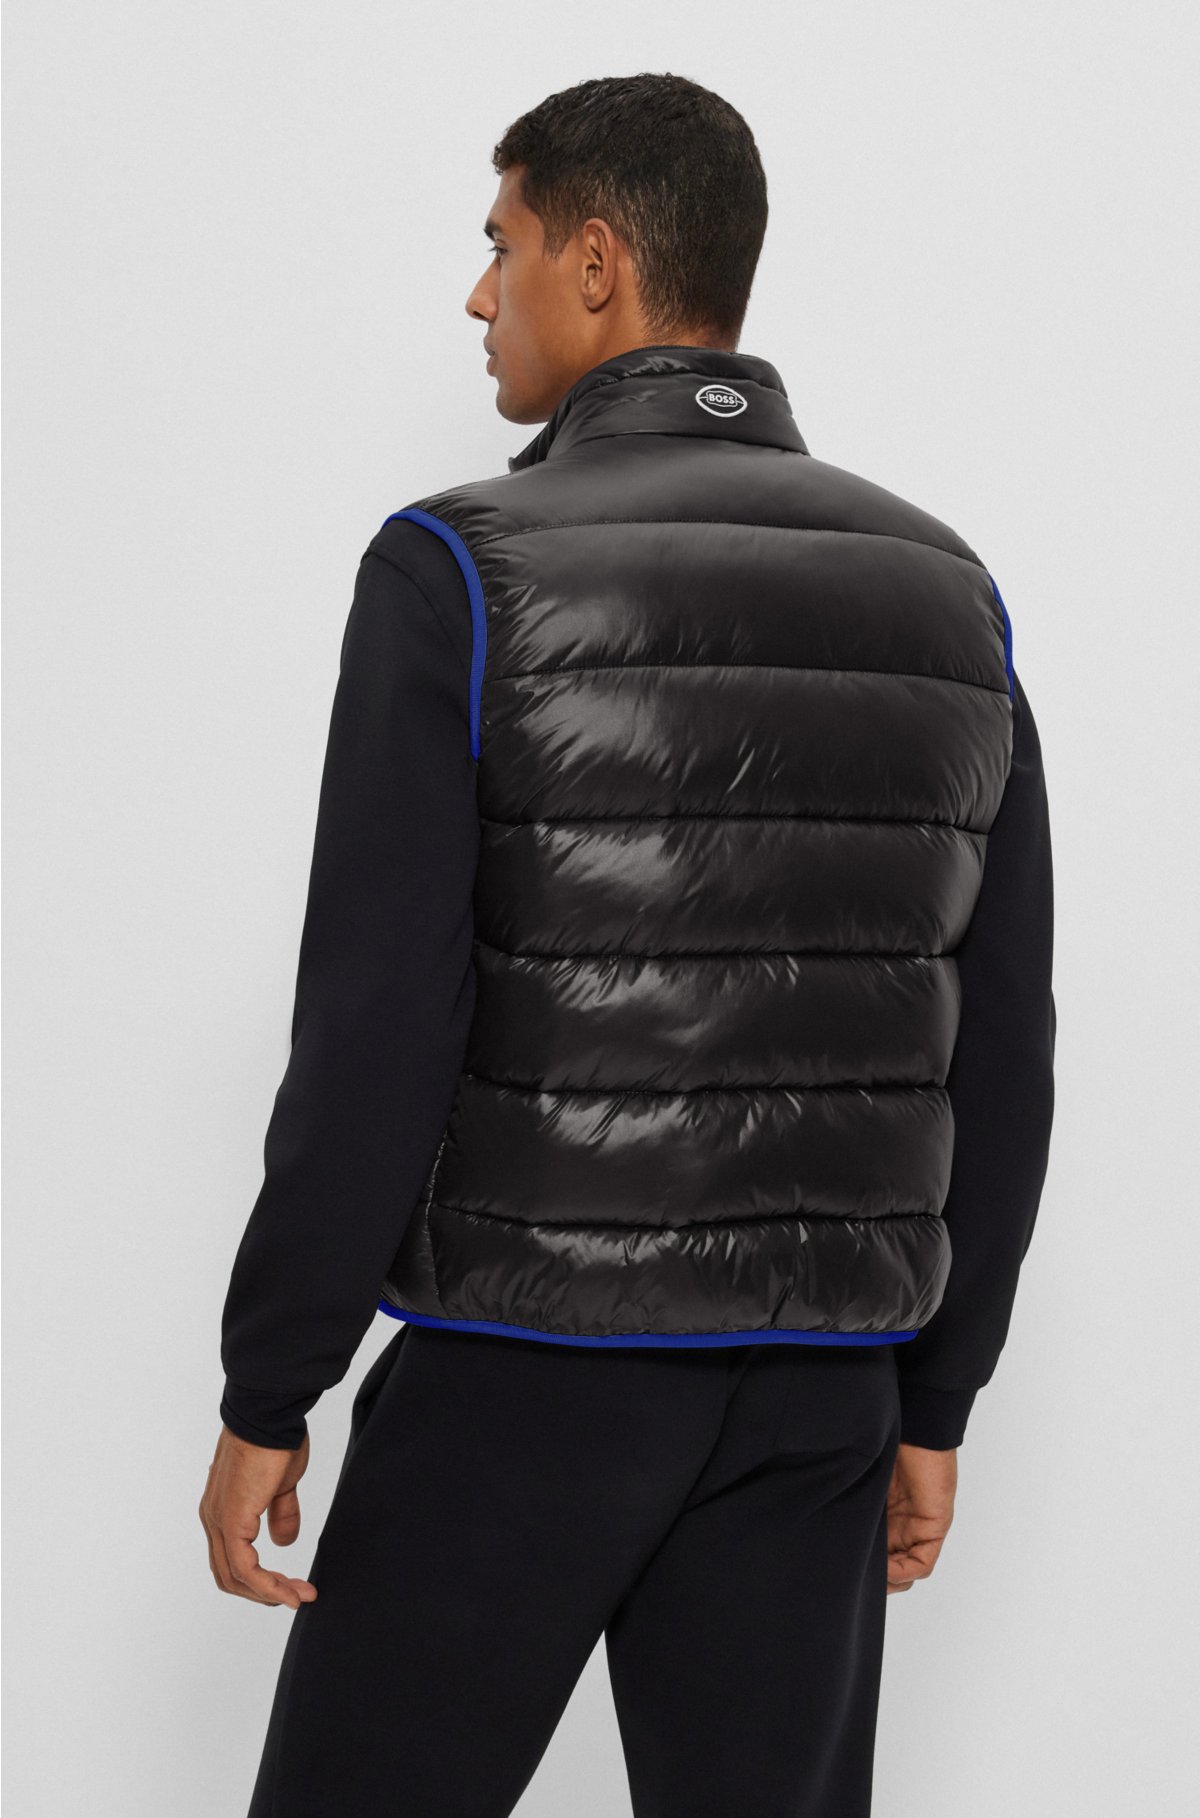  BOSS x NFL water-repellent padded gilet with collaborative branding, Giants